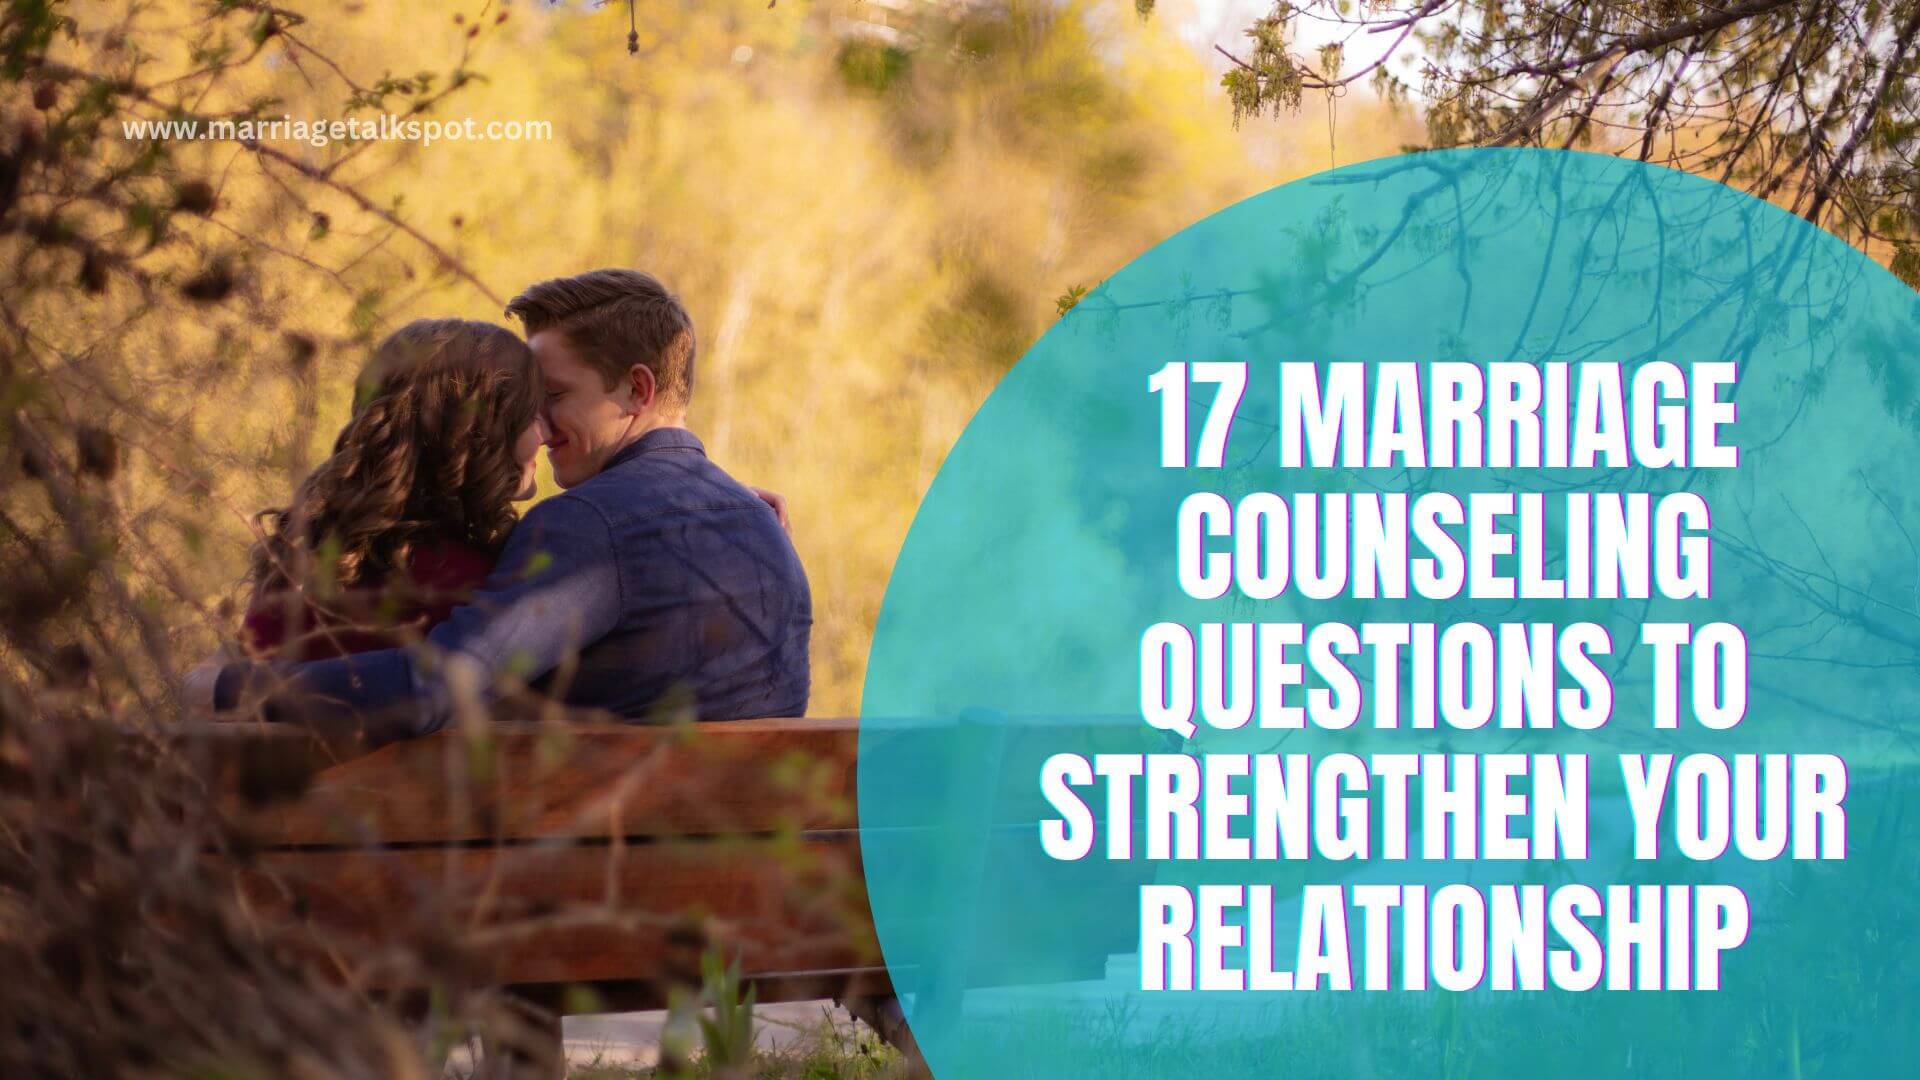 Marriage Counseling Questions To Strengthen Your Relationship (1)